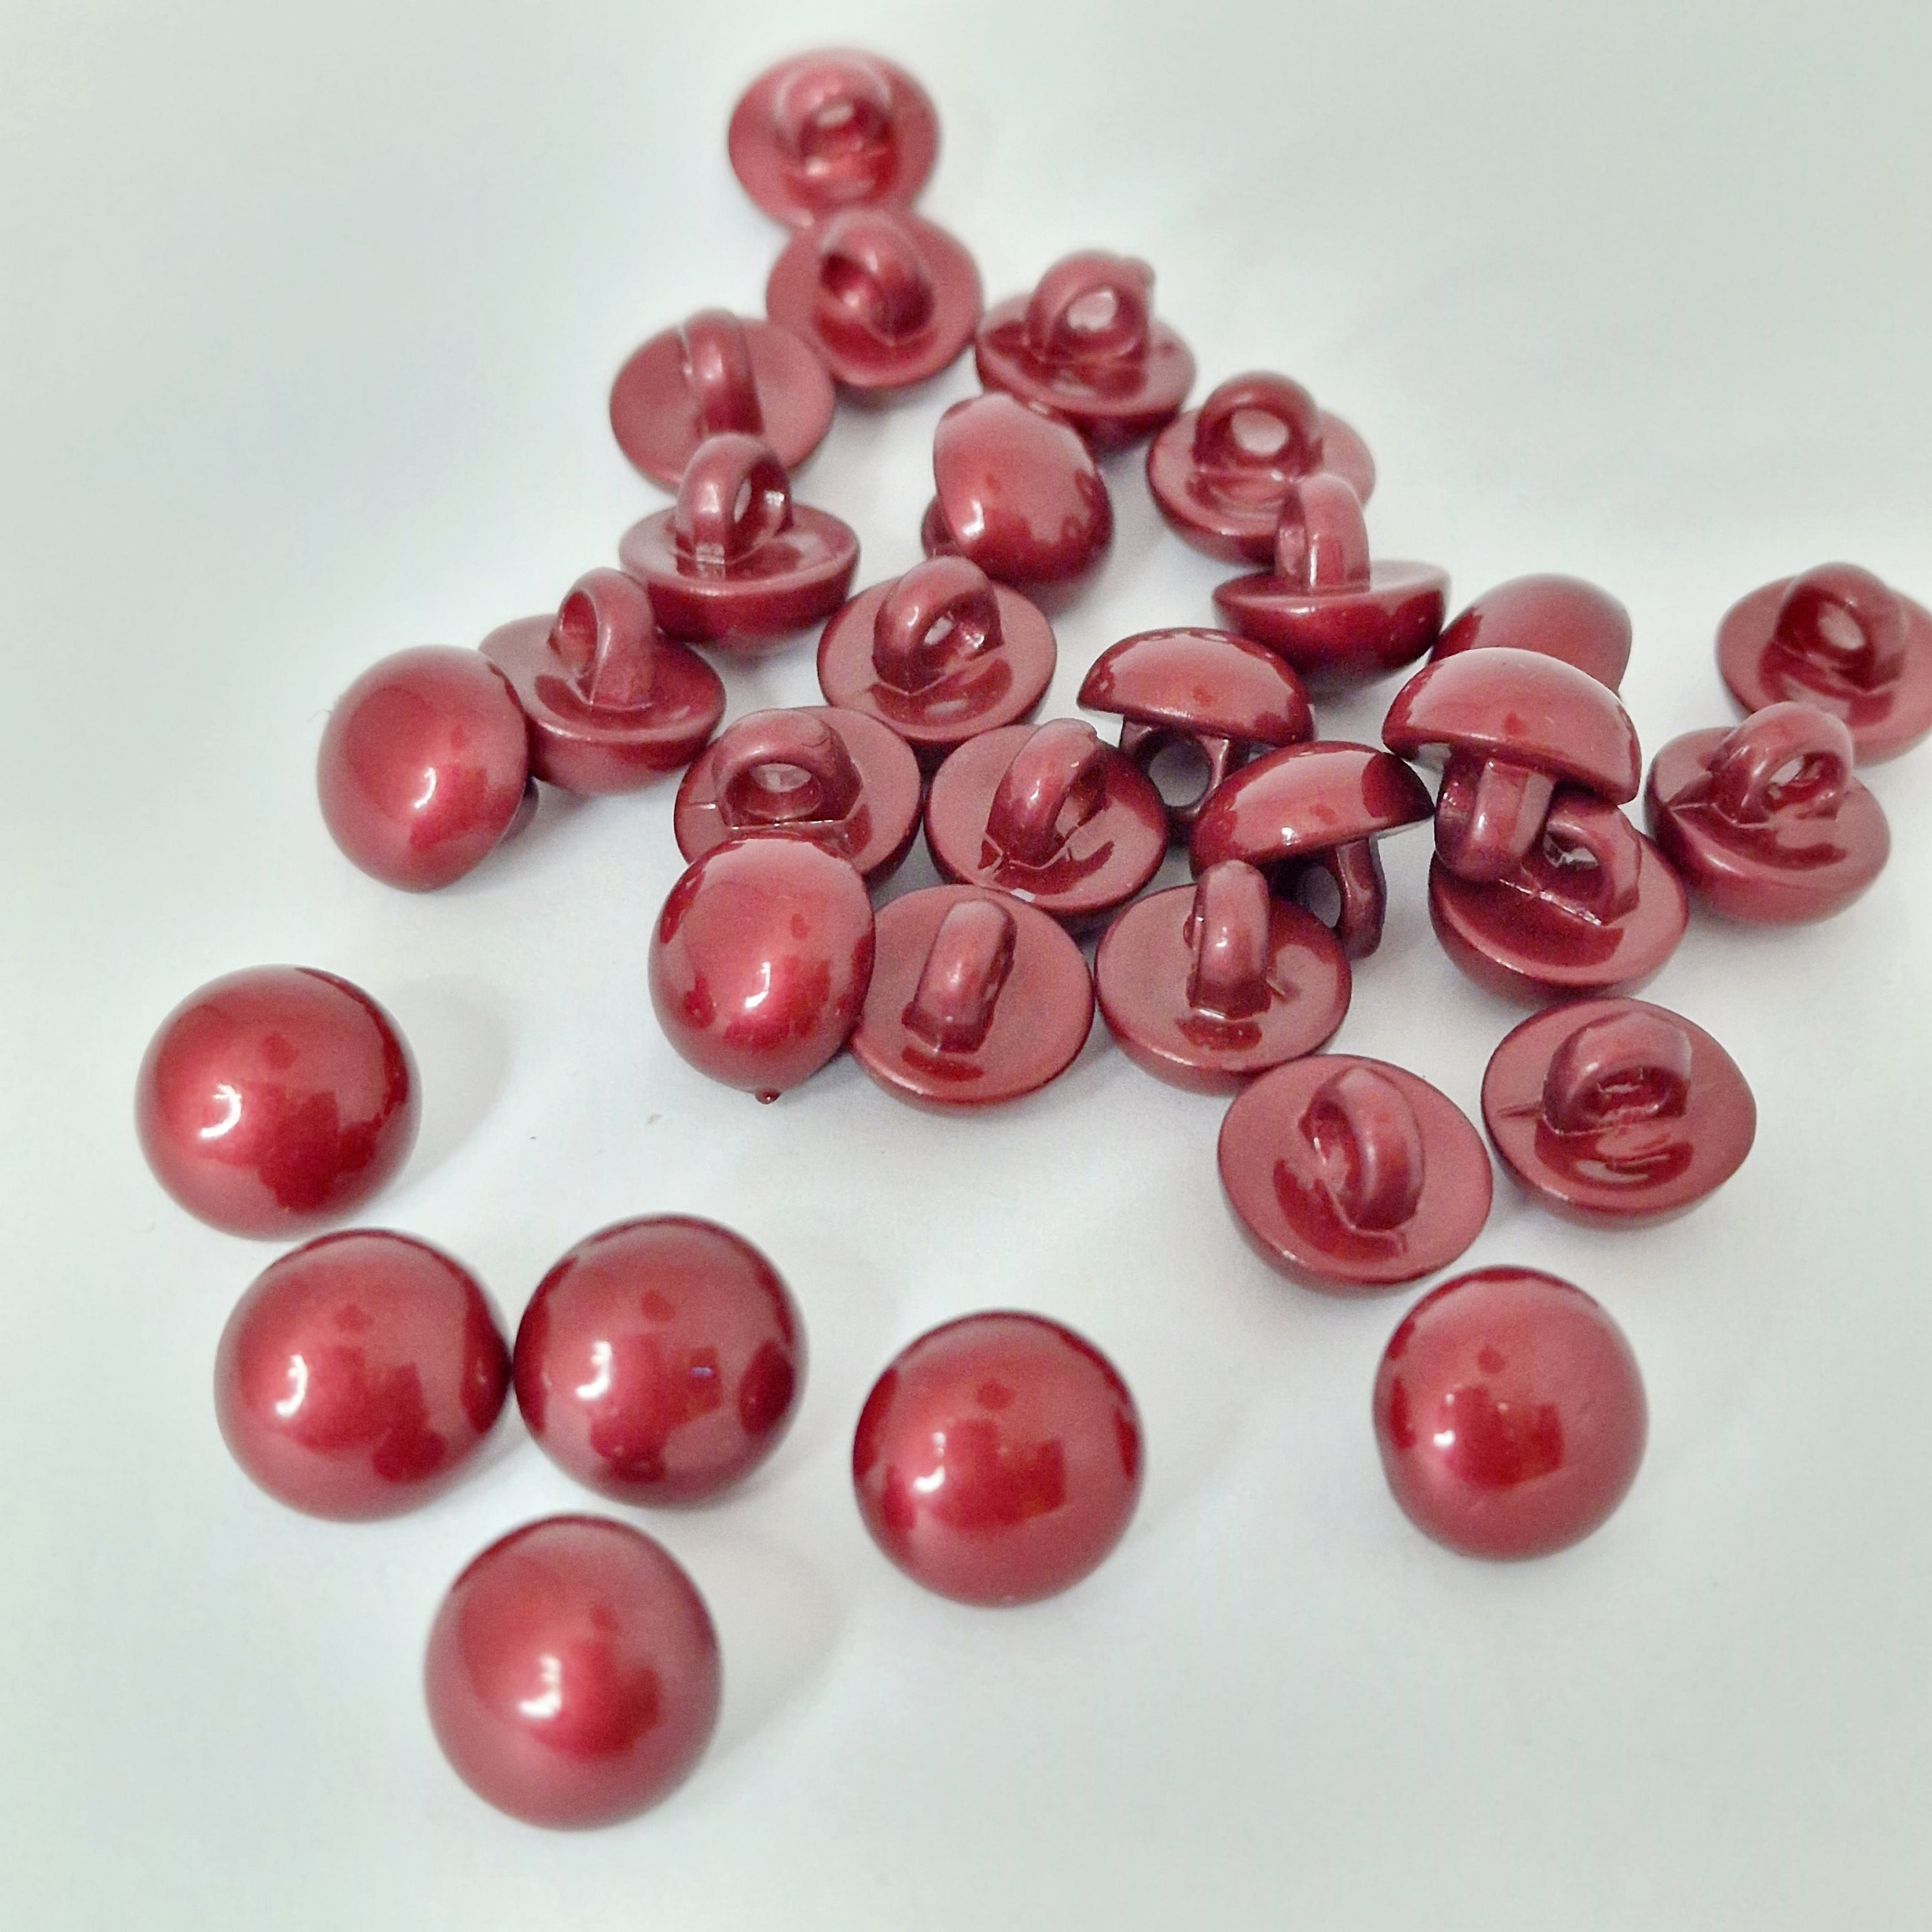 MajorCrafts 24pcs 11mm Burgundy Red High-Grade Acrylic Small Round Sewing Mushroom Shank Buttons